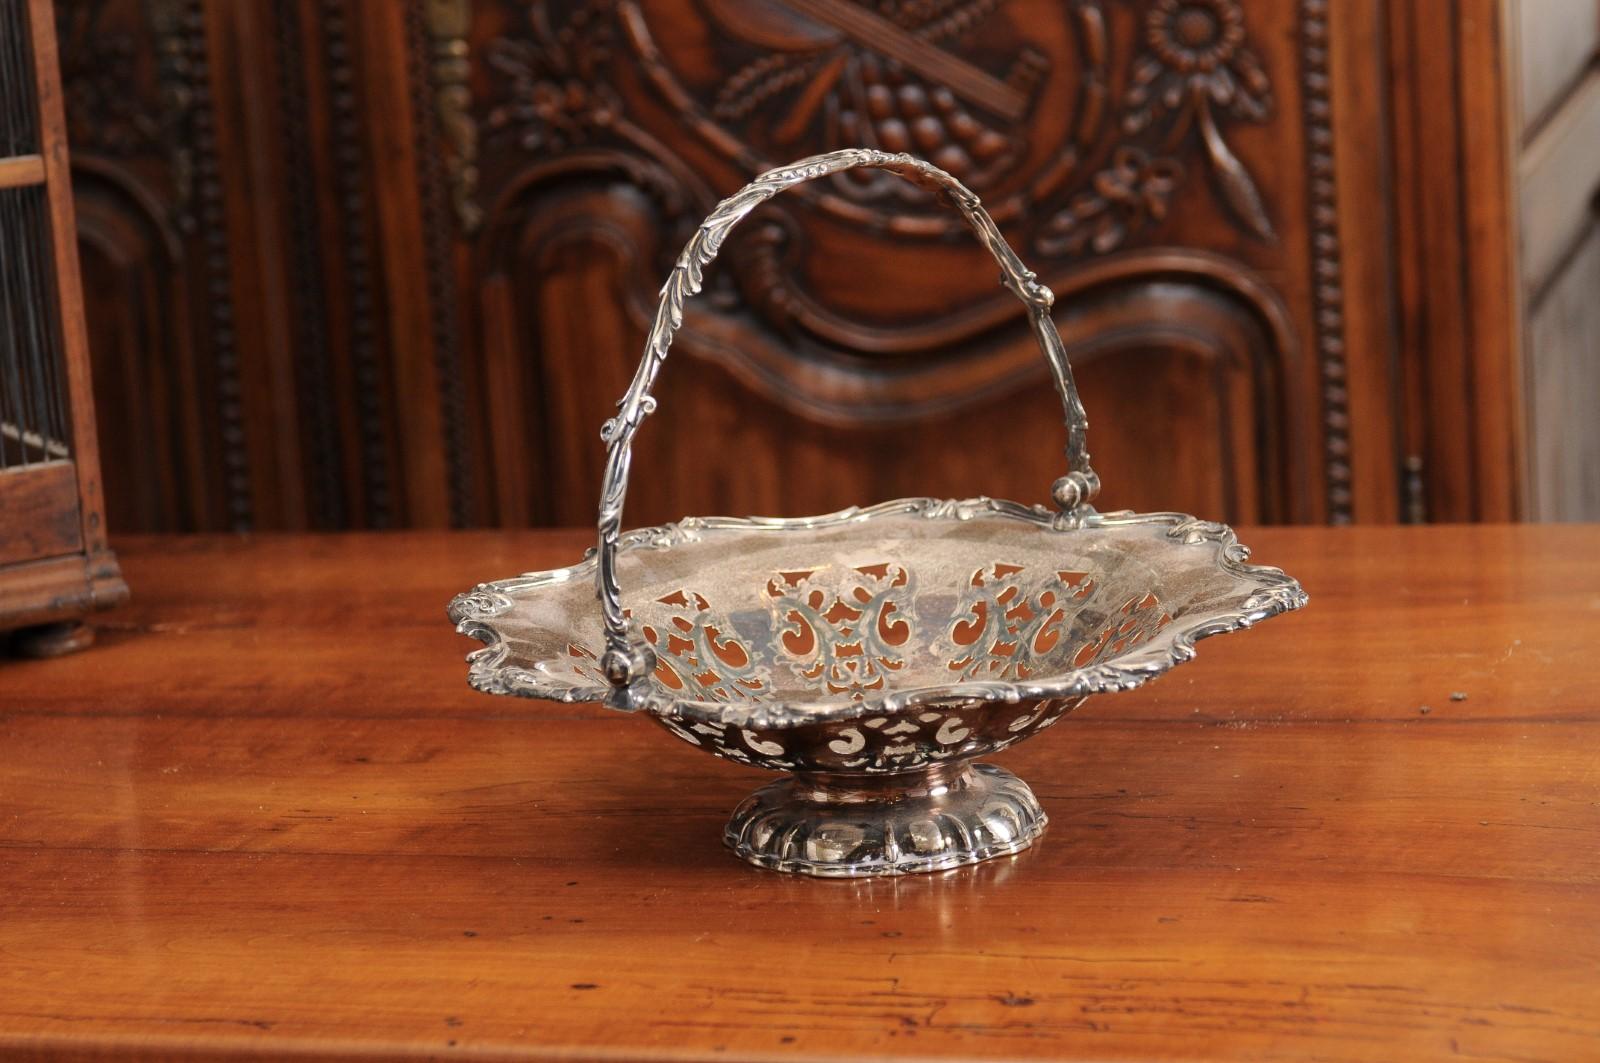 An English Victorian period Melvin Pratt round silver cake basket from the late 19th century, with pierced design and foliage motifs. Created in England by Melvin Pratt during the later years of the Victorian era, this silver piece features a